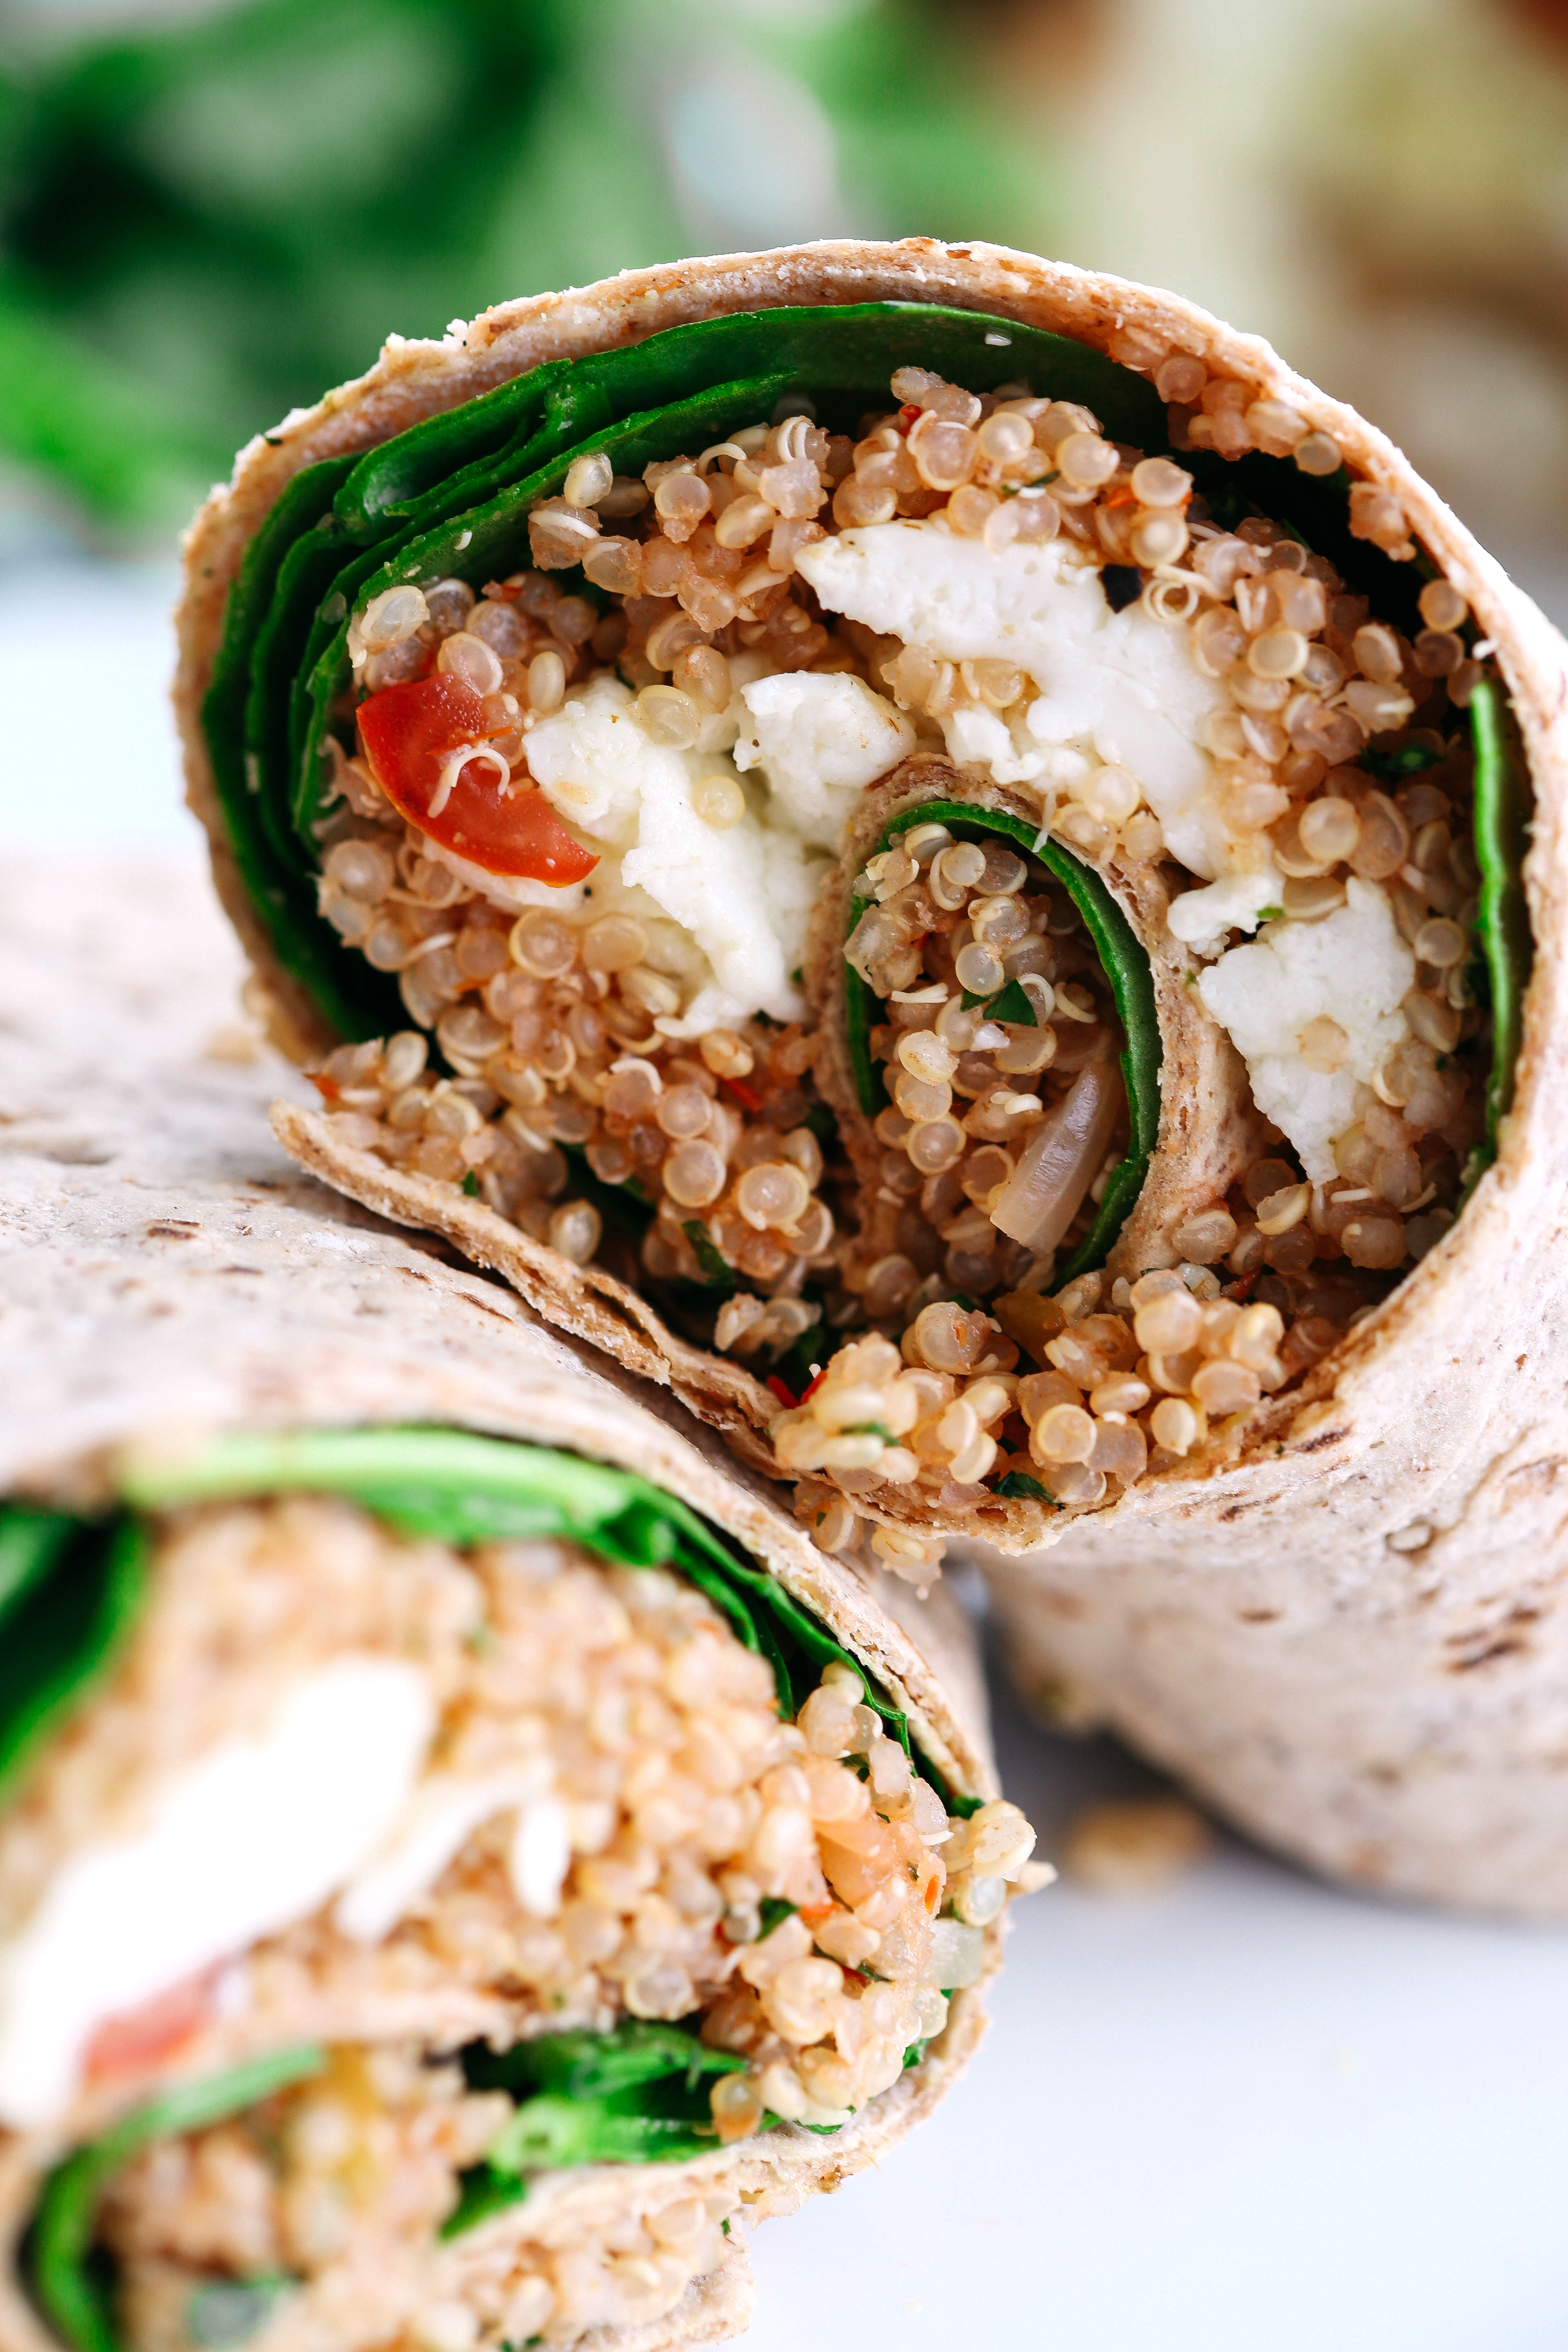 These Quinoa Egg White Wraps are super easy to make, are packed with tons of protein and taste super flavorful! They're also perfect to grab on-the-go!